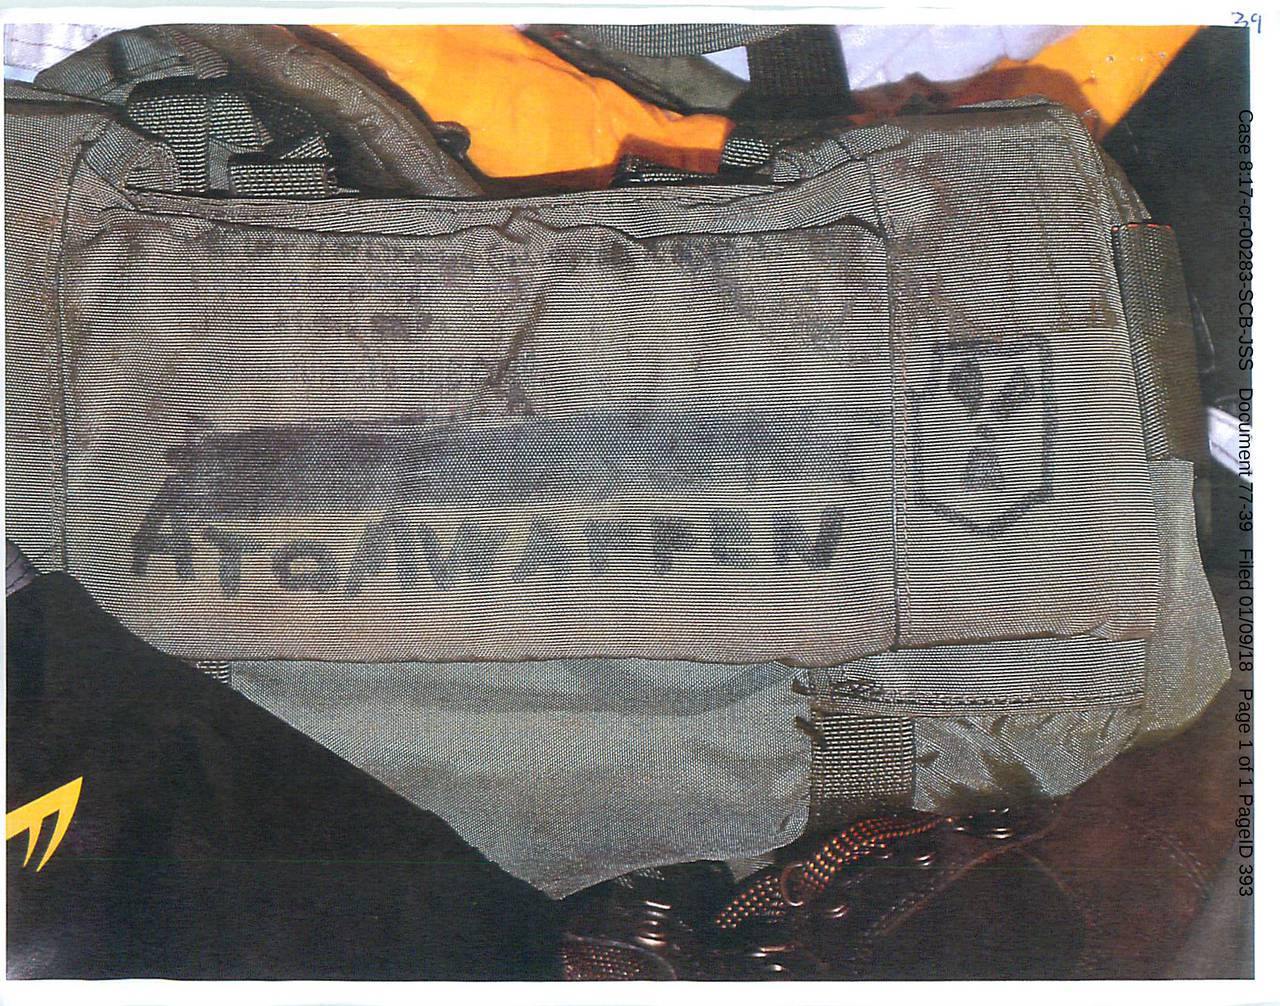 A bag with Atomwaffen written on the outside found in Brandon Russell's garage.